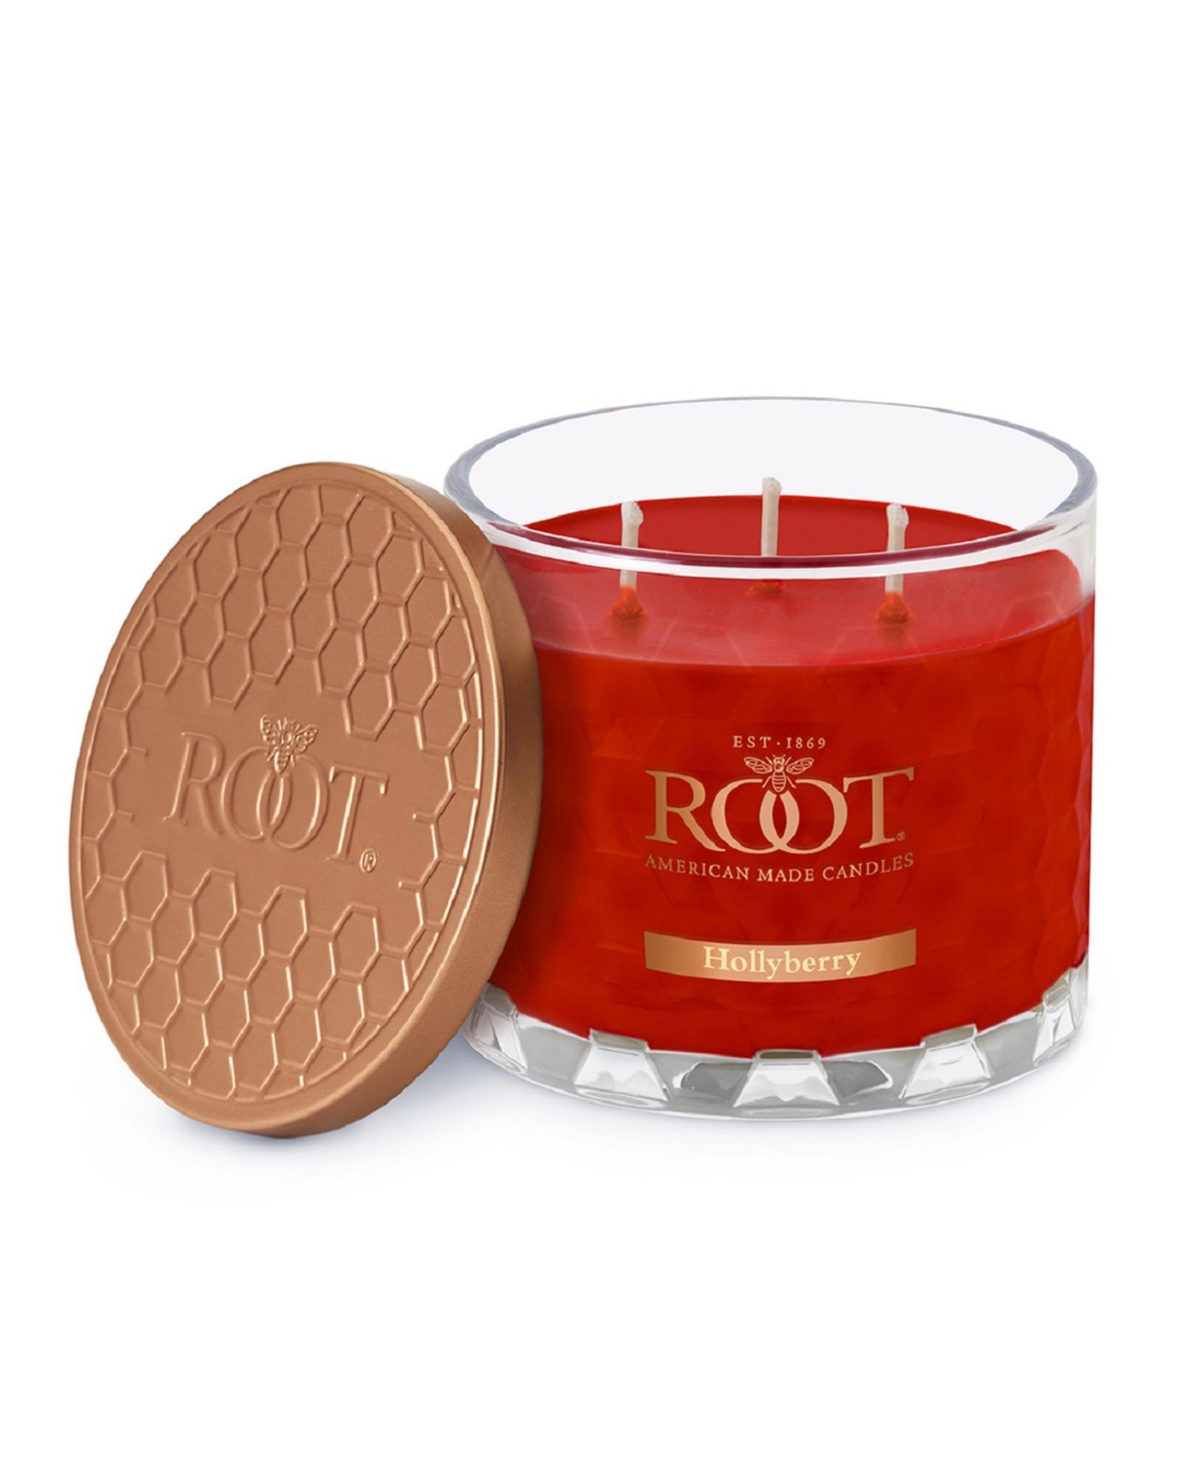 Holly berry Fragrance Honeycomb Glass Jar Candle - Red